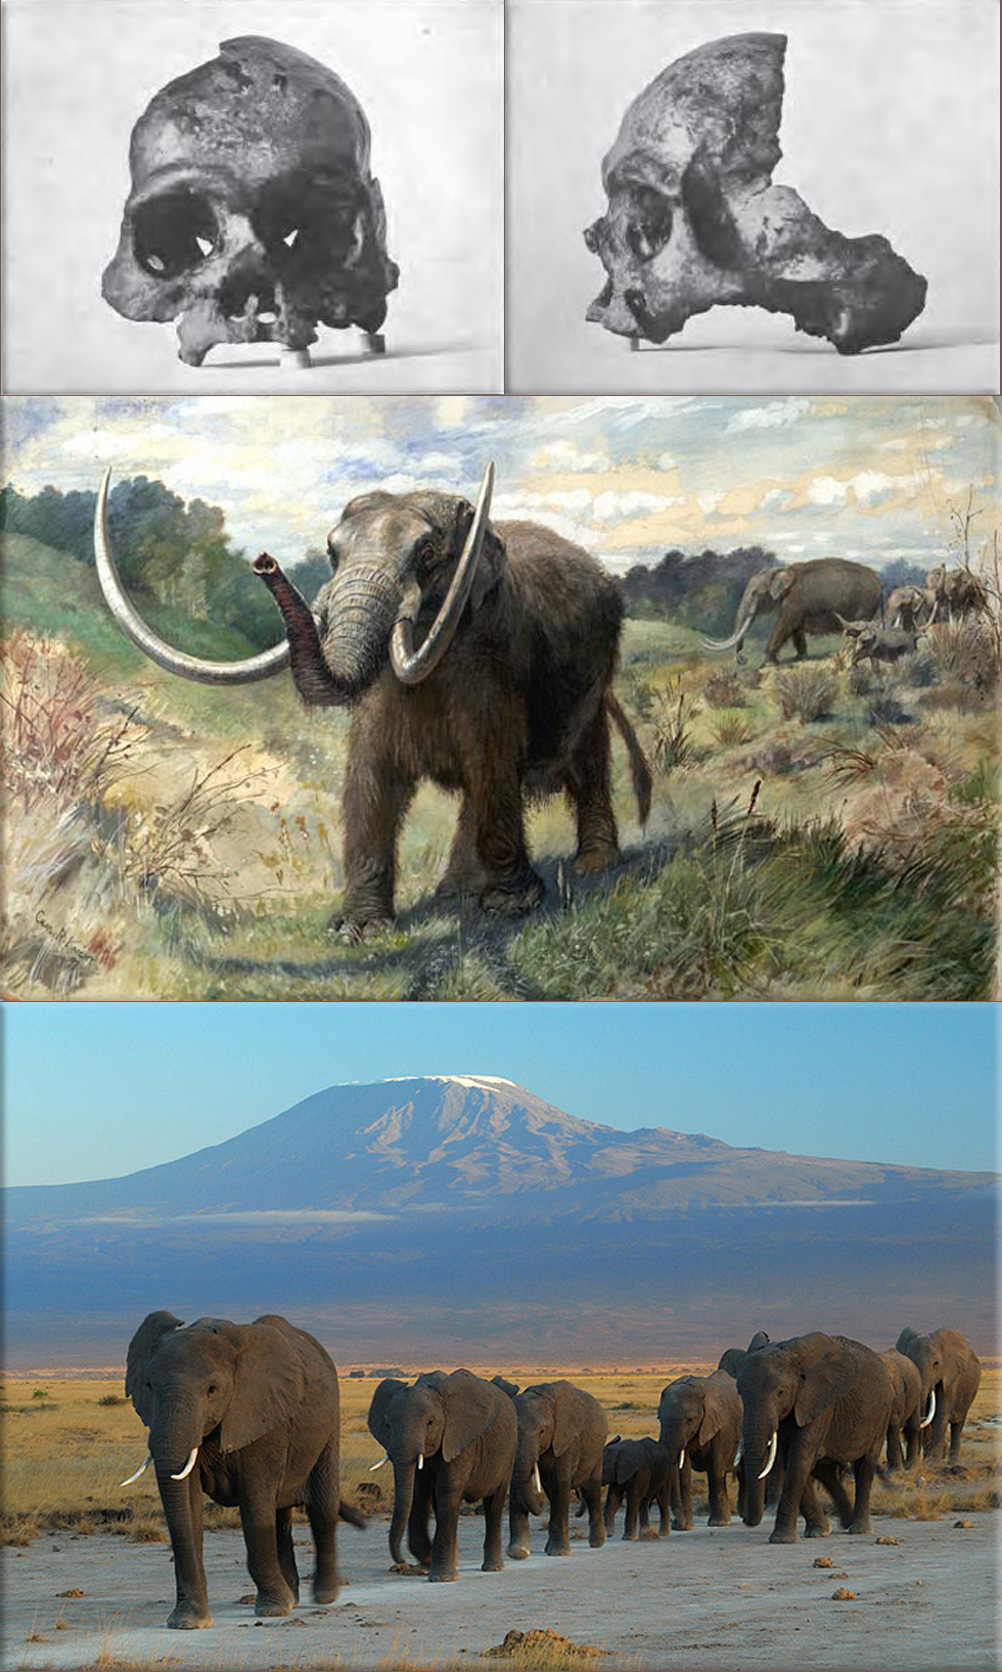 Calaveras Skull: (Skeletal Remains Suggesting or Attributed to Early Man in North America) ● Mastodon, Restoration by Charles R. Knight ● Elephant family at moving at Amboseli national park against Mount Kilimanjaro